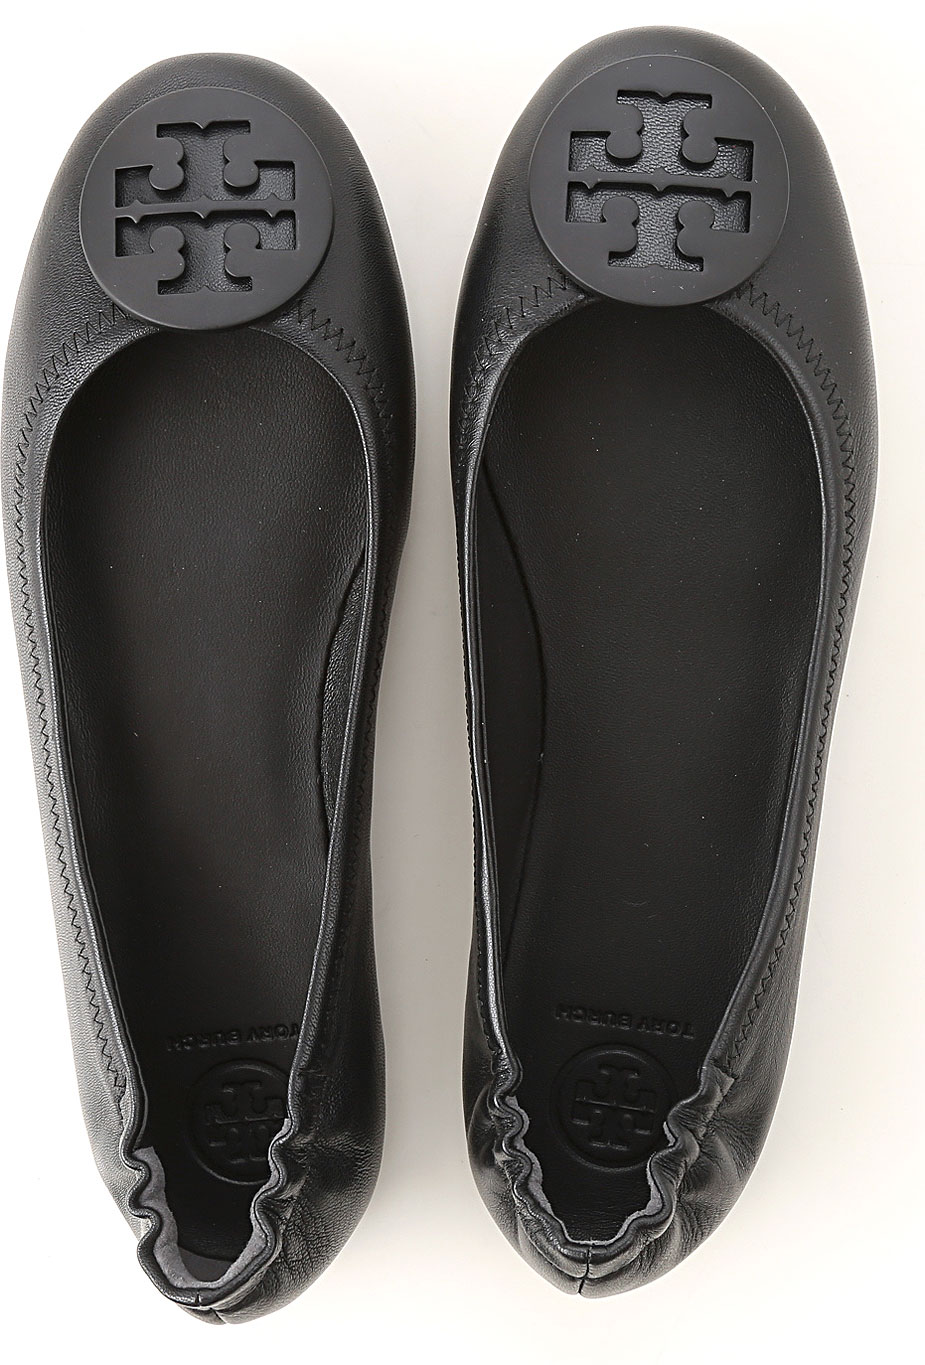 Womens Shoes Tory Burch, Style code: 49350-006-